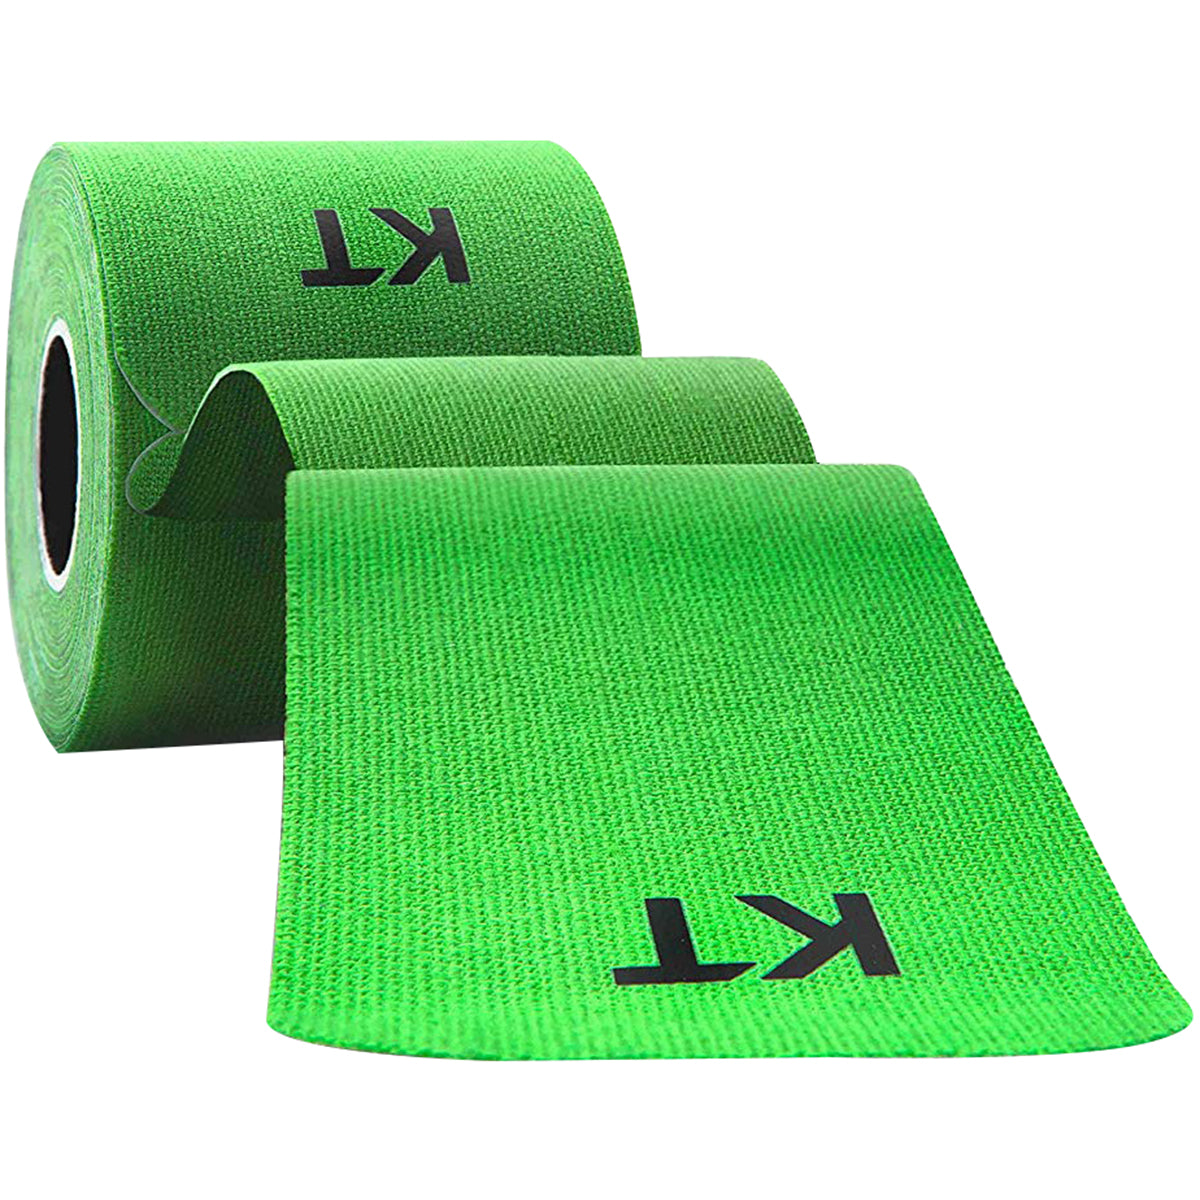 KT Tape Cotton 10" Precut Kinesiology Therapeutic Sports Roll, 20 Strips, Lime KT Tape